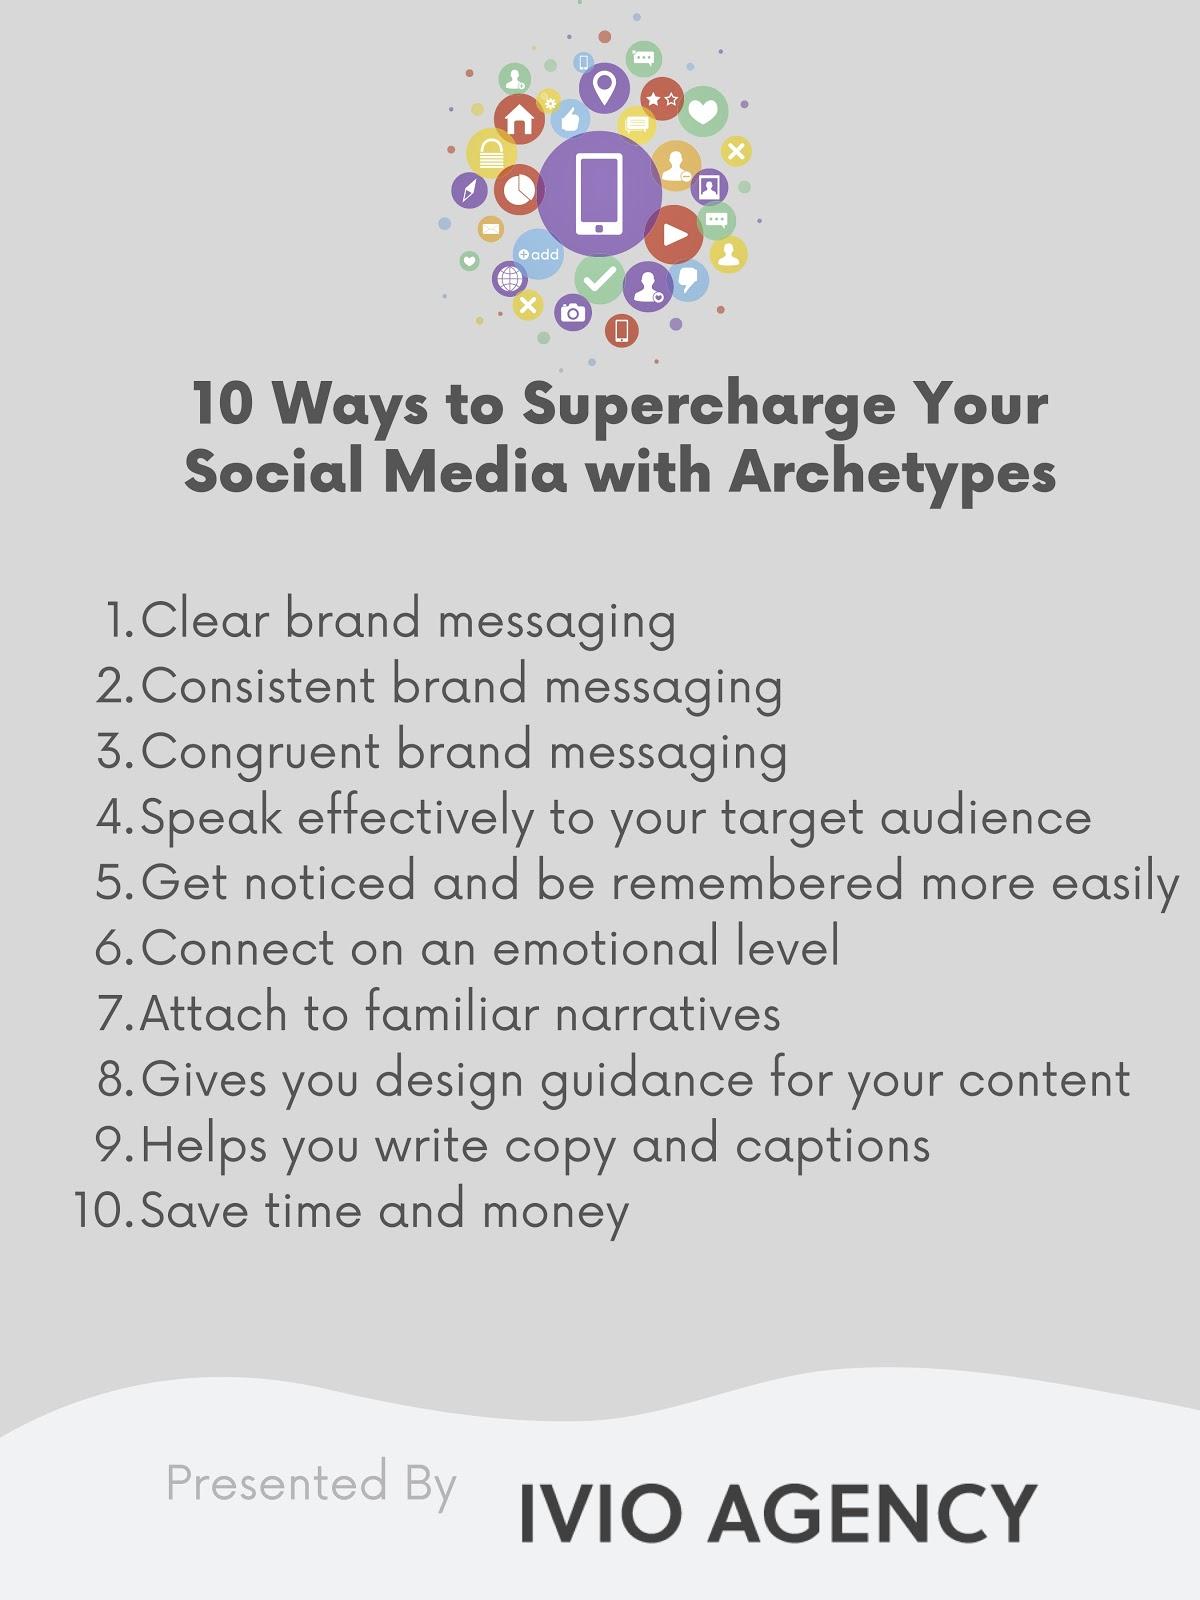 10 Powerful Ways Brand Archetypes Supercharge Your Social Media Captions & Campaigns